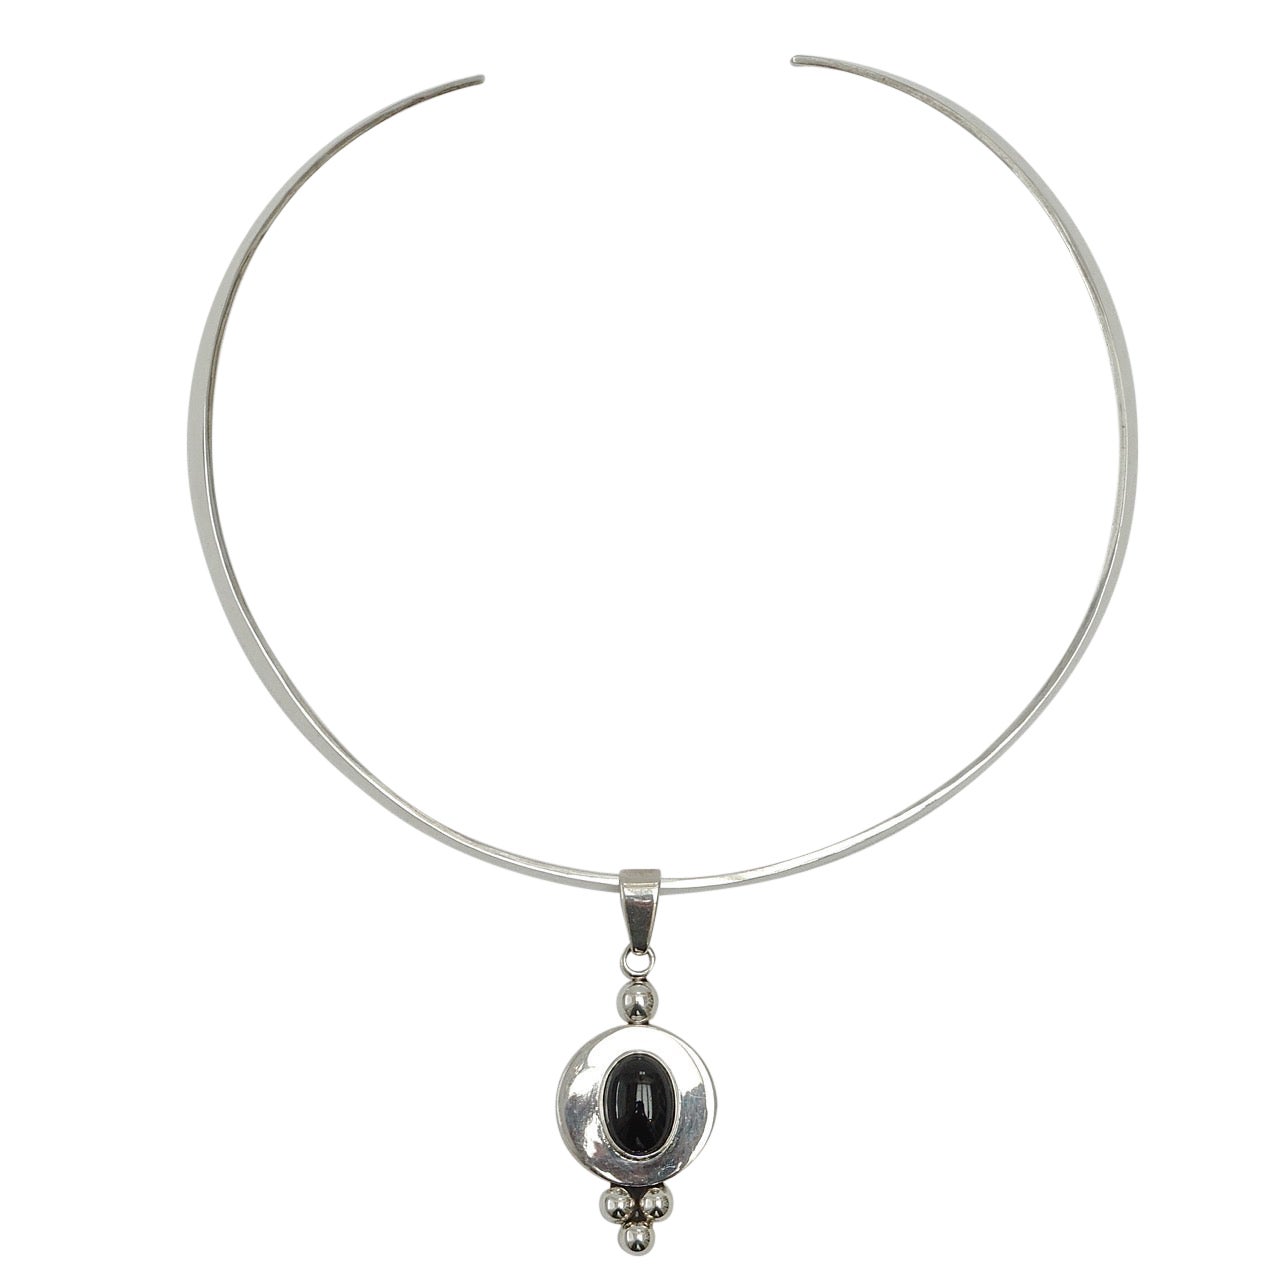 Mexico Sterling Silver Torque Collar Necklace with Silver and Onyx Pendant